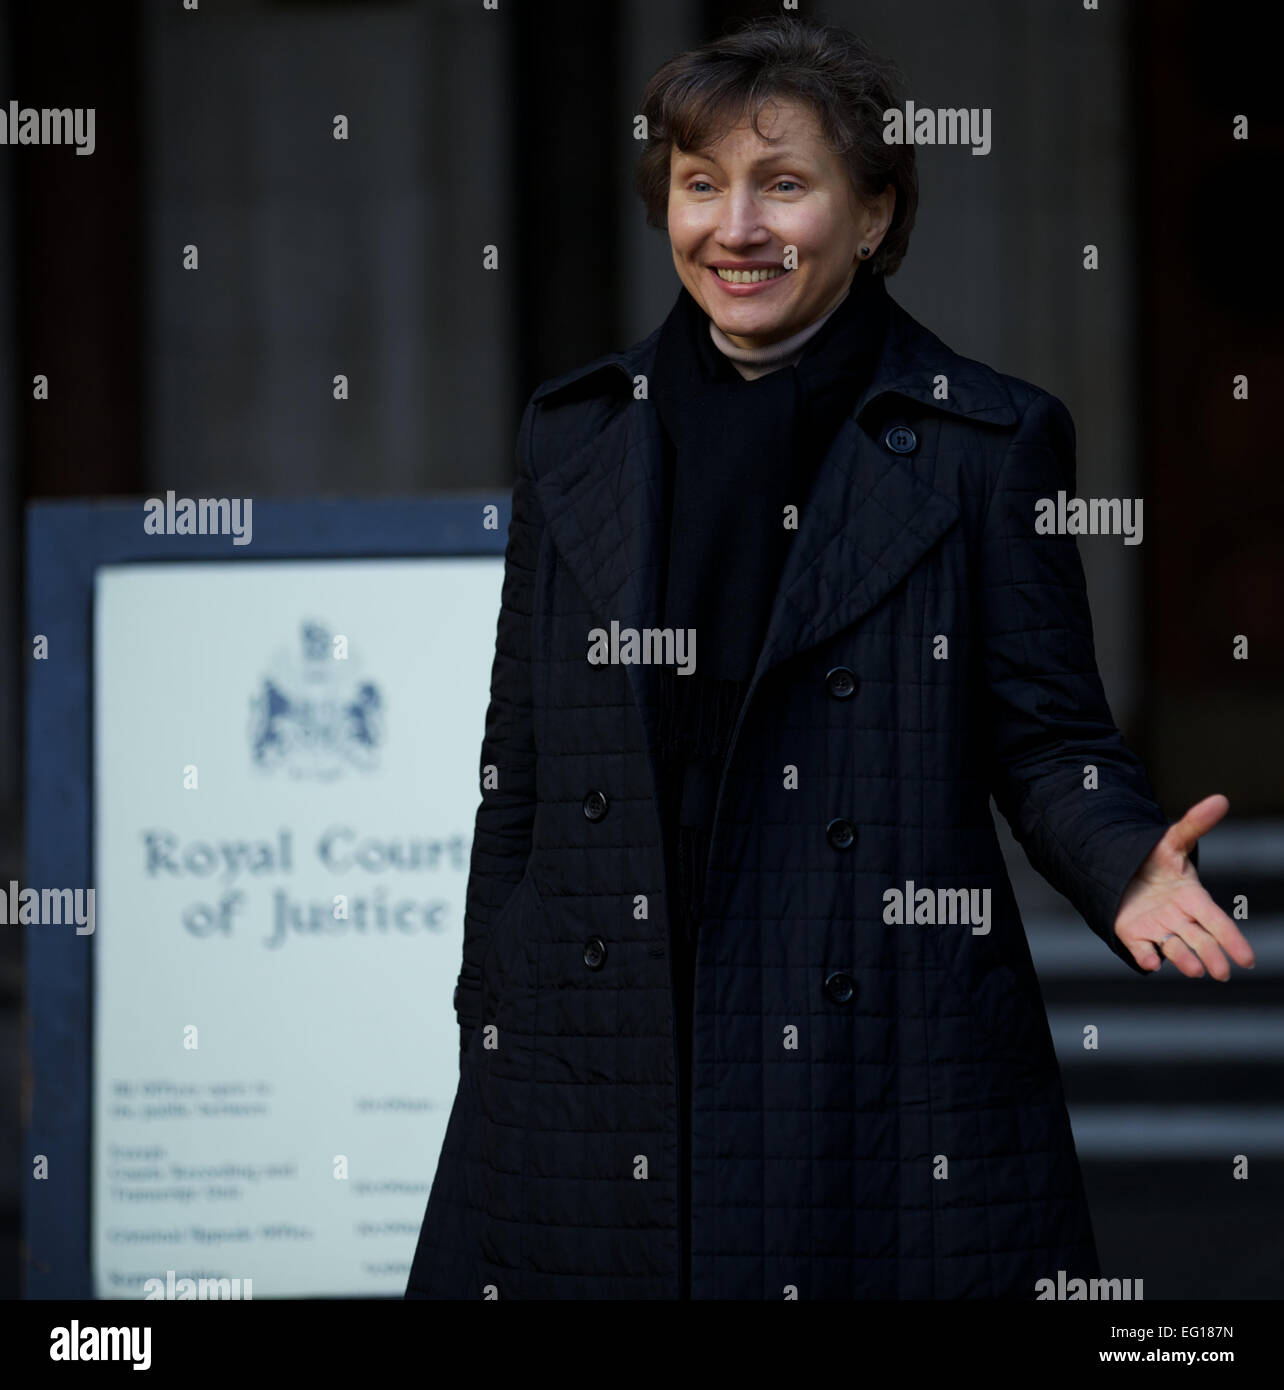 UNITED KINGDOM, London : Russian widow of the former KGB spy Alexander Litvinenko, Marina (R) is photographed leaving Royal Courts of Justice after winning the support of a high court judge to have a public enquiry for the death of her husband in central London on February 11, 2014 Stock Photo